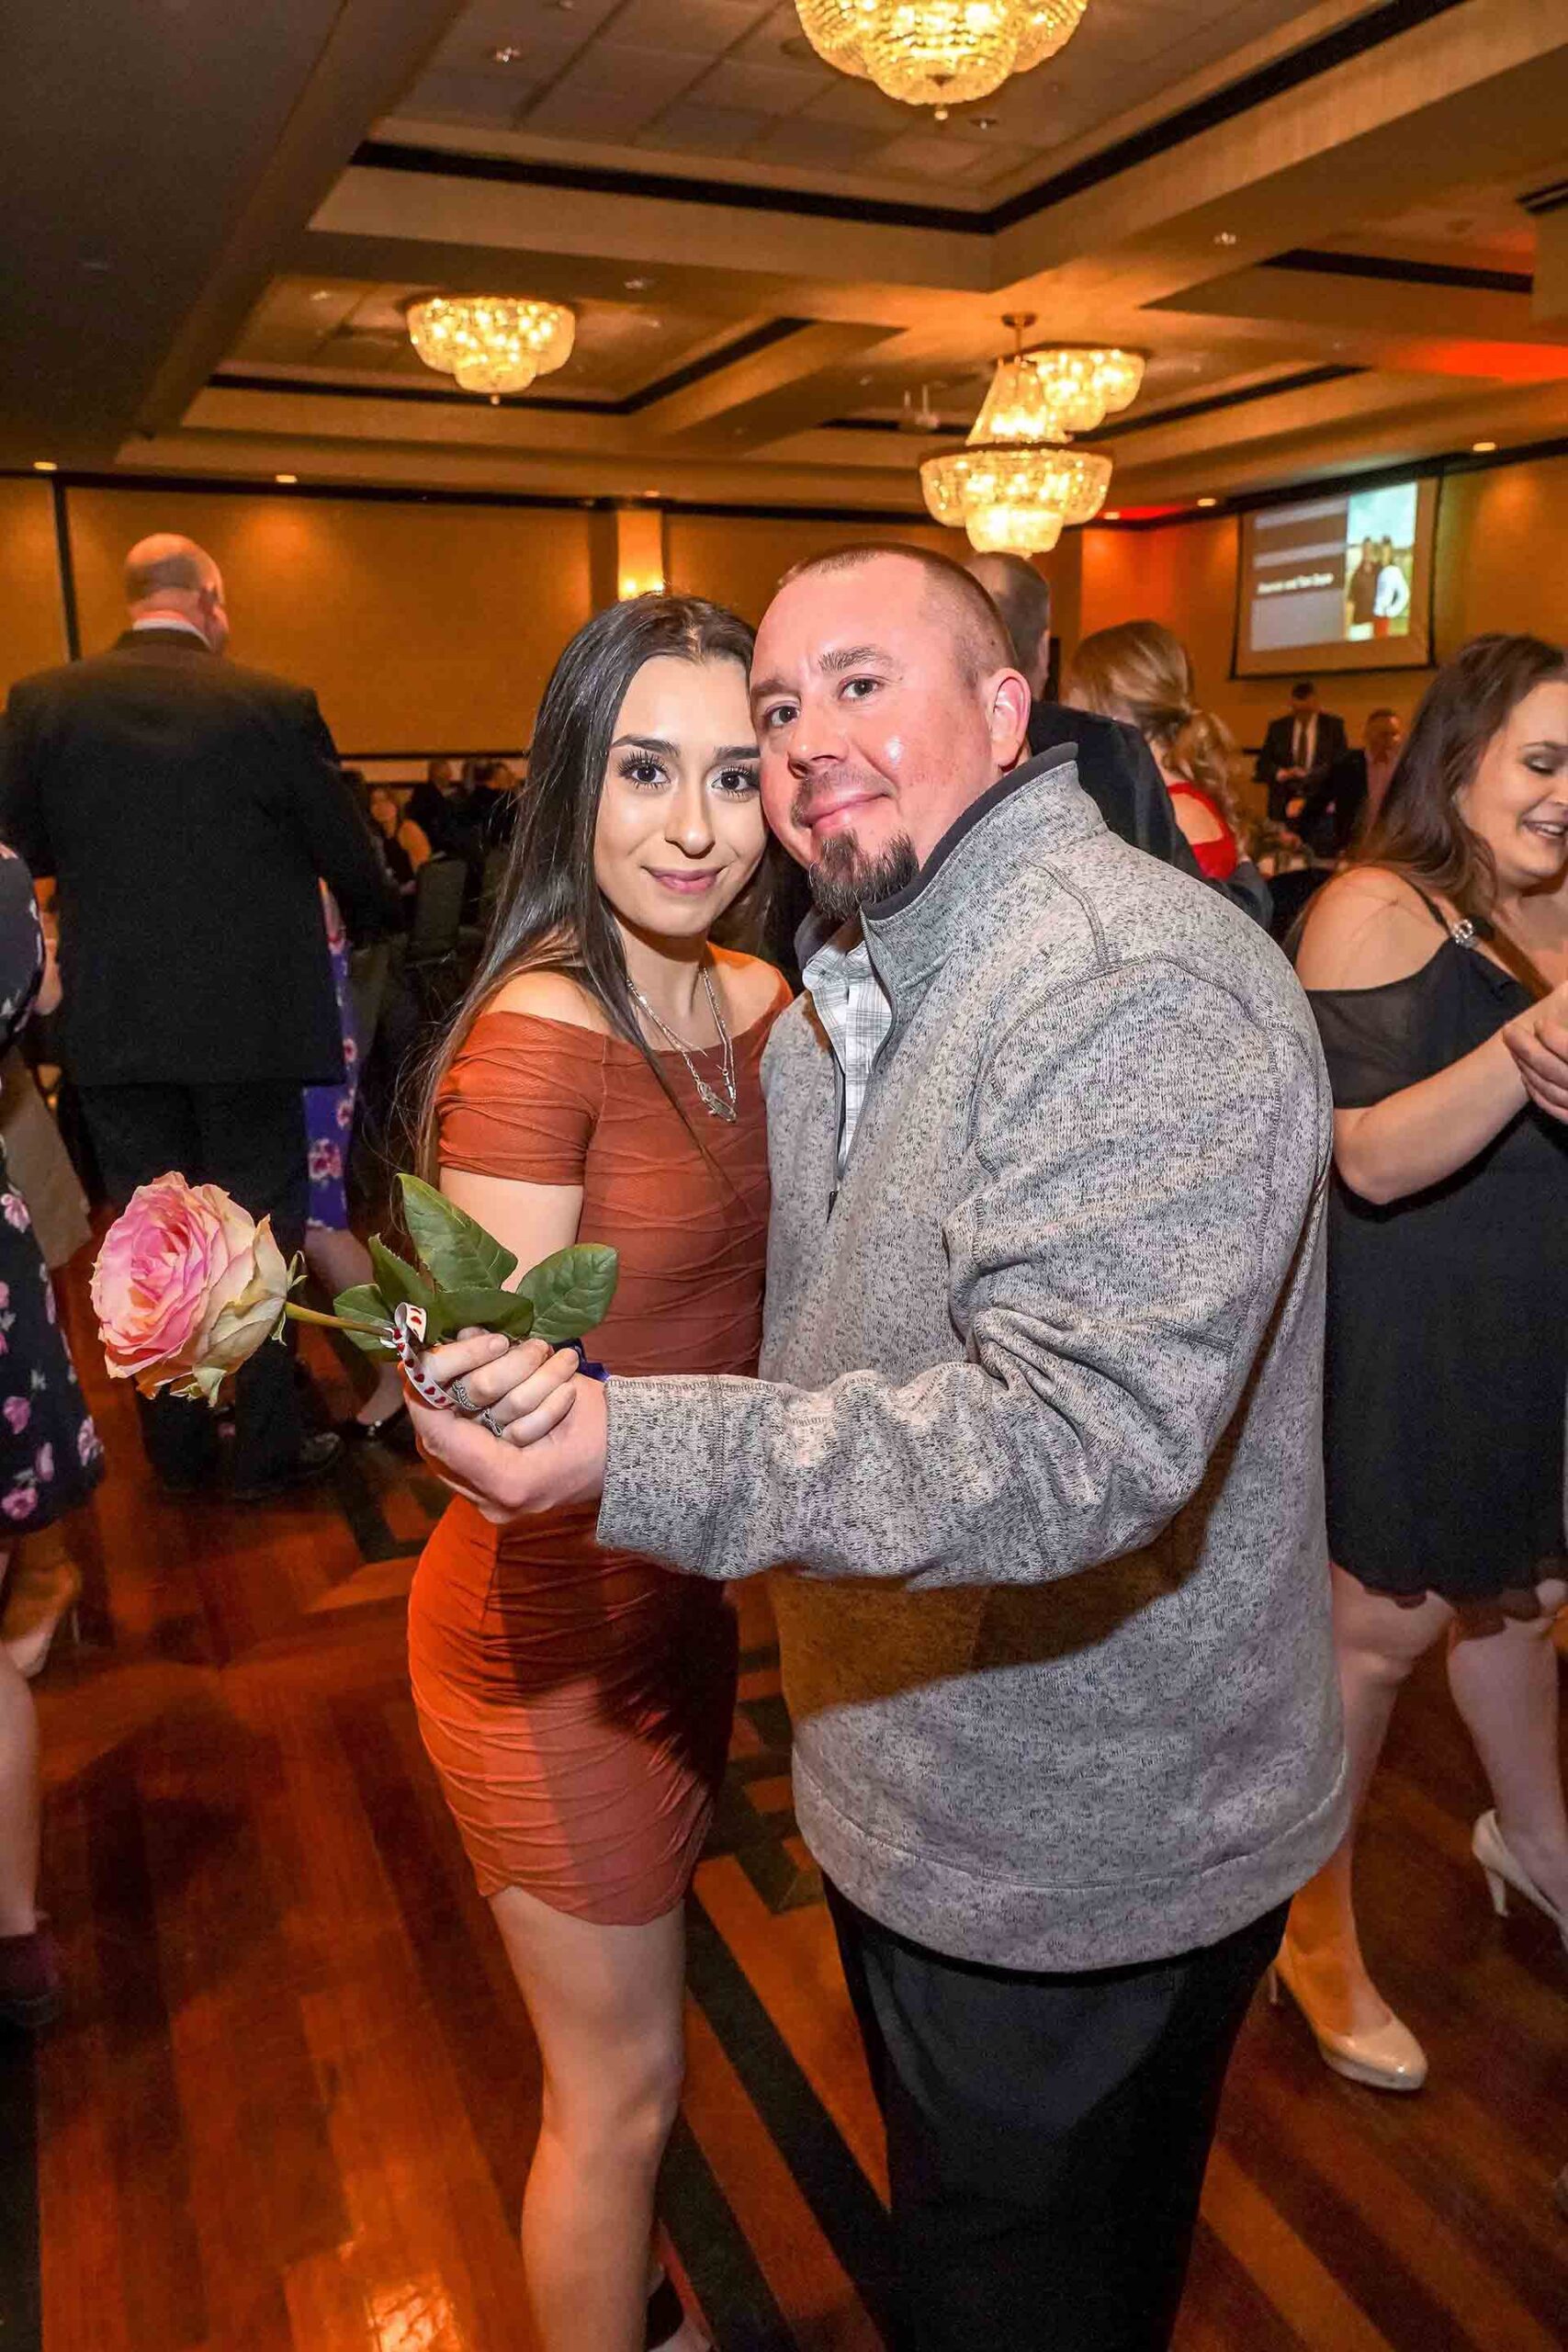 father-daughter-dance-2019-girl-with-orange-dress-dancing